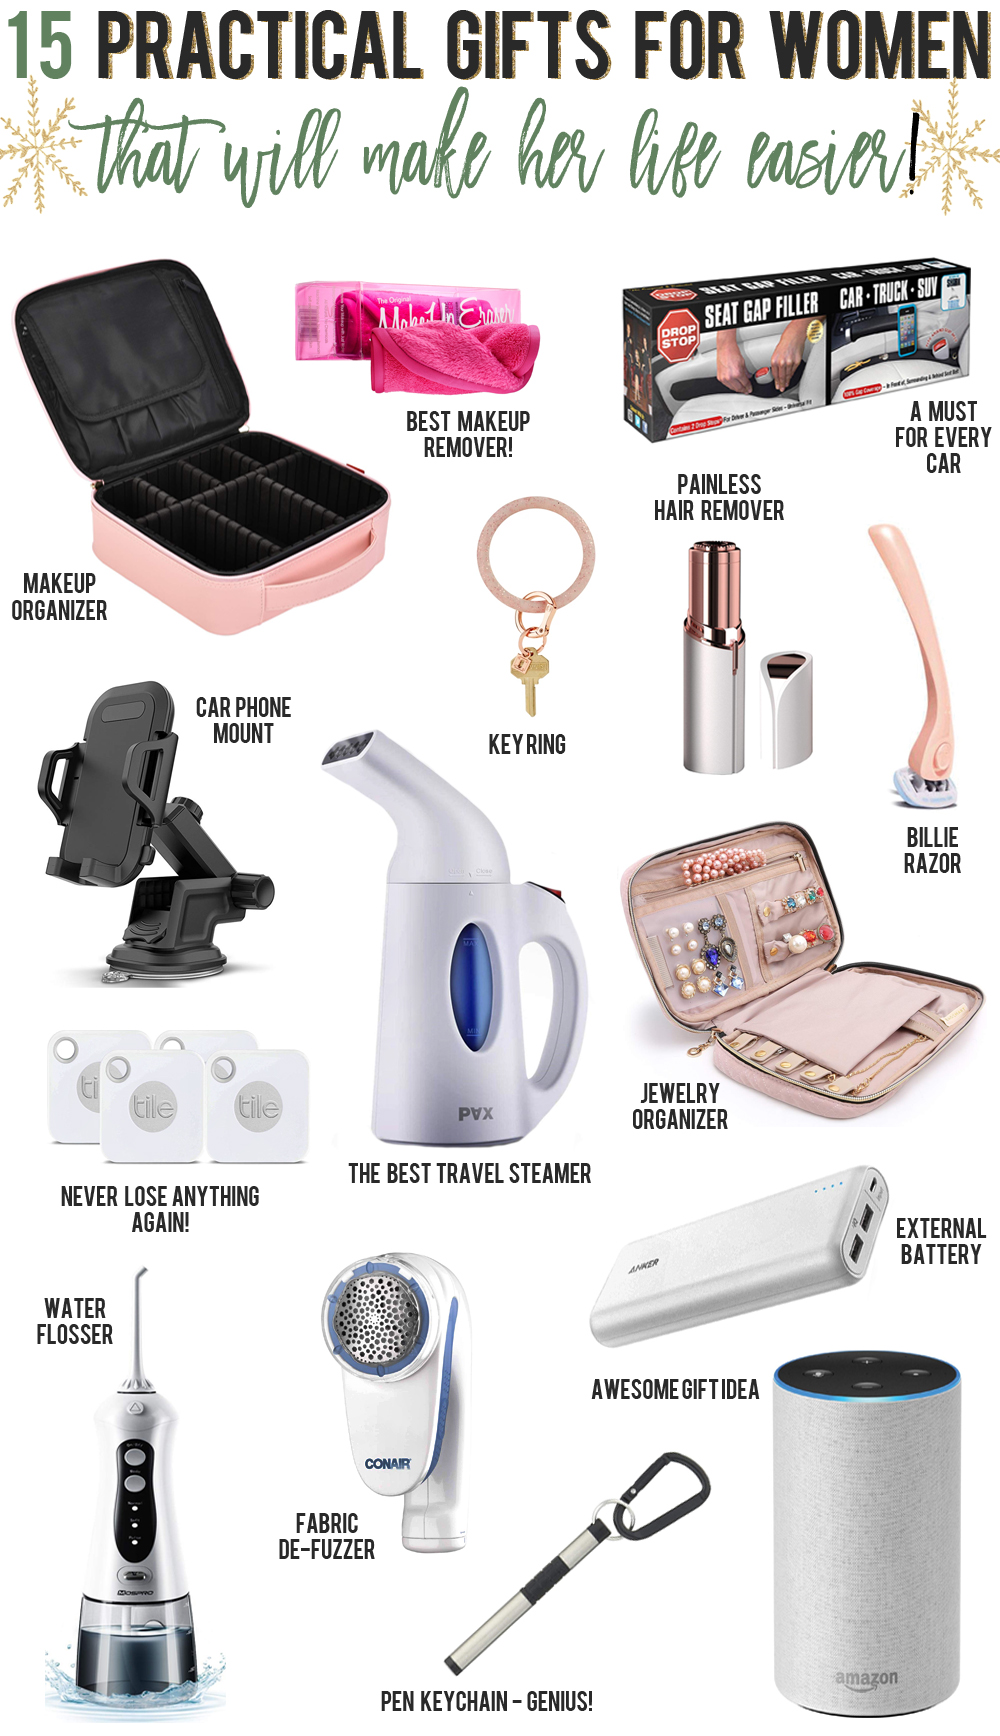 Best Practical Gifts for Her That She'll Actually Use and Love